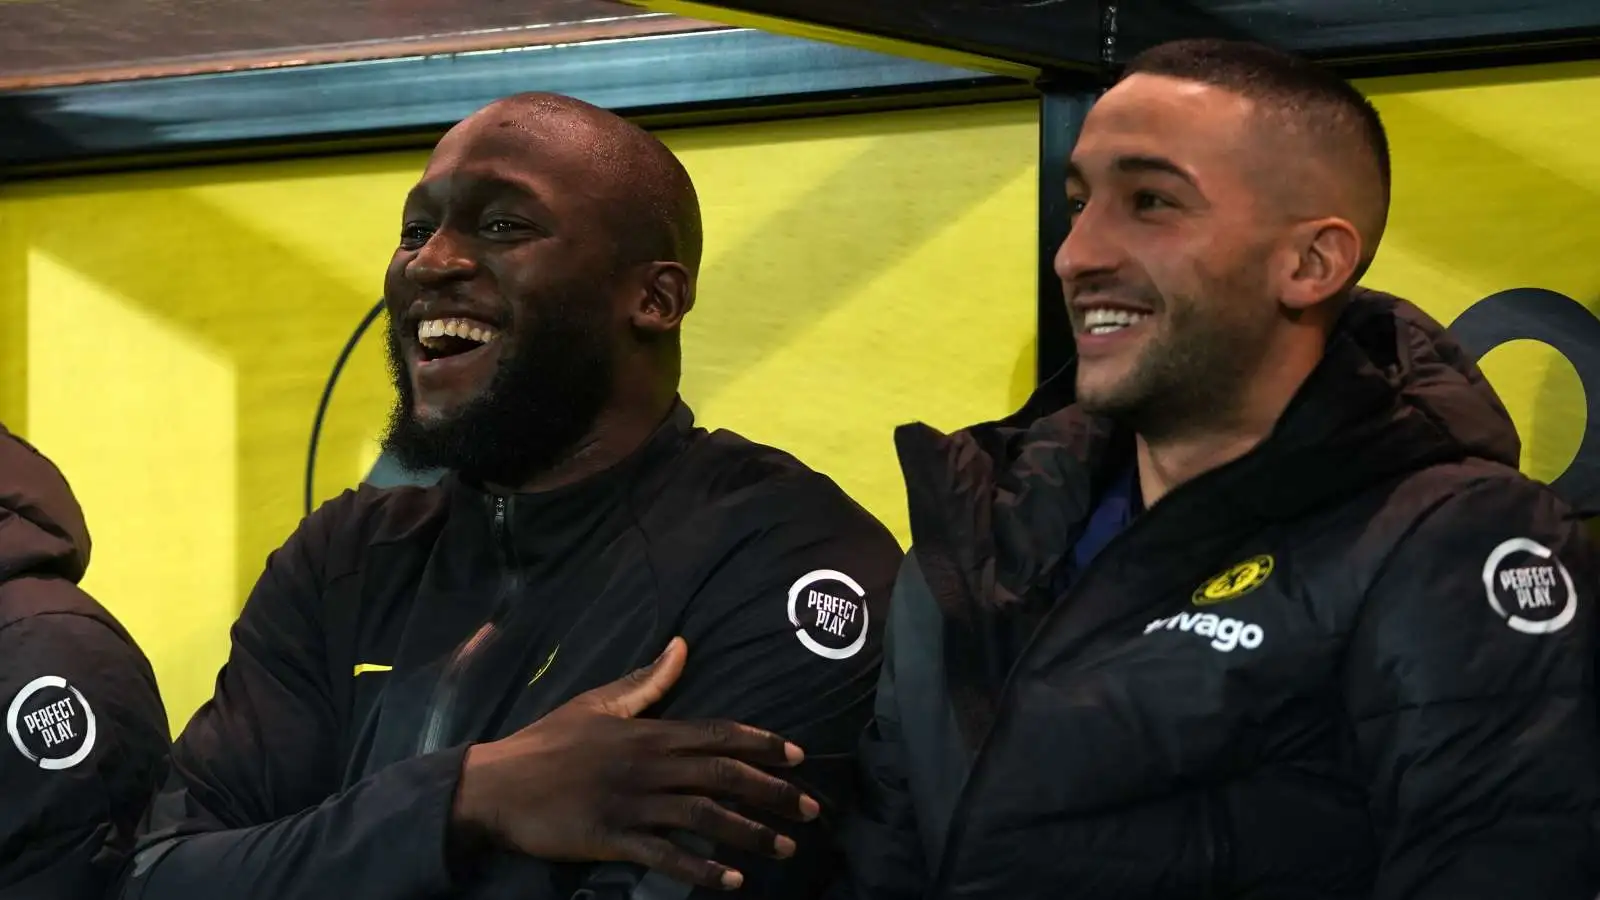 Romelu Lukaku and Hakim Ziyech smiling while sitting on the bench for Chelsea